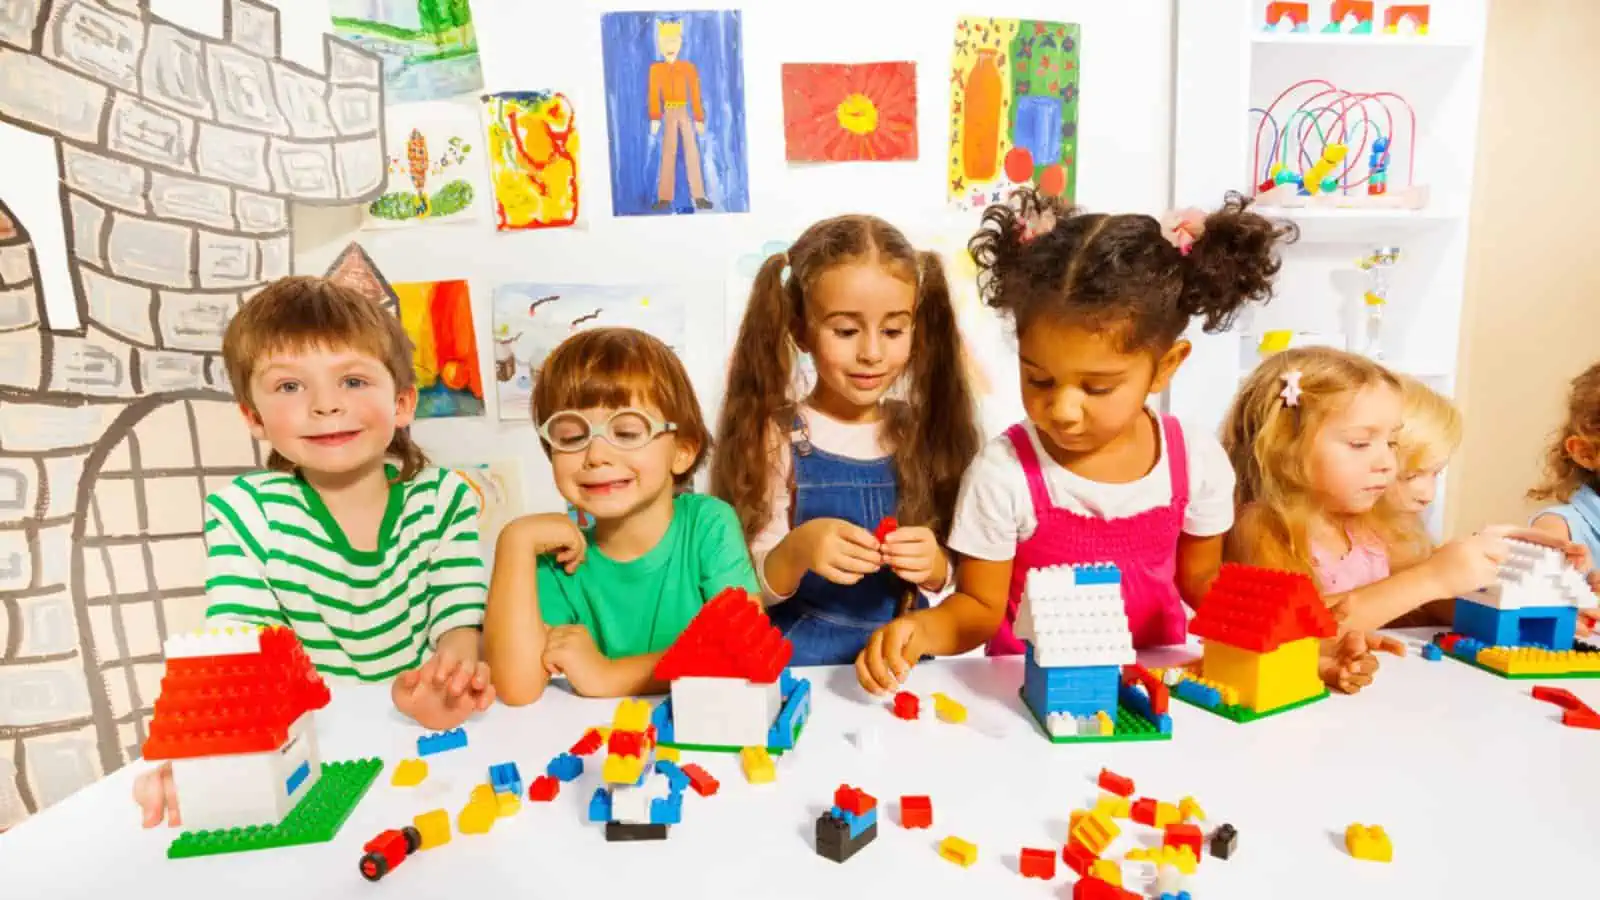 Happy kids playing toys and colorful blocks